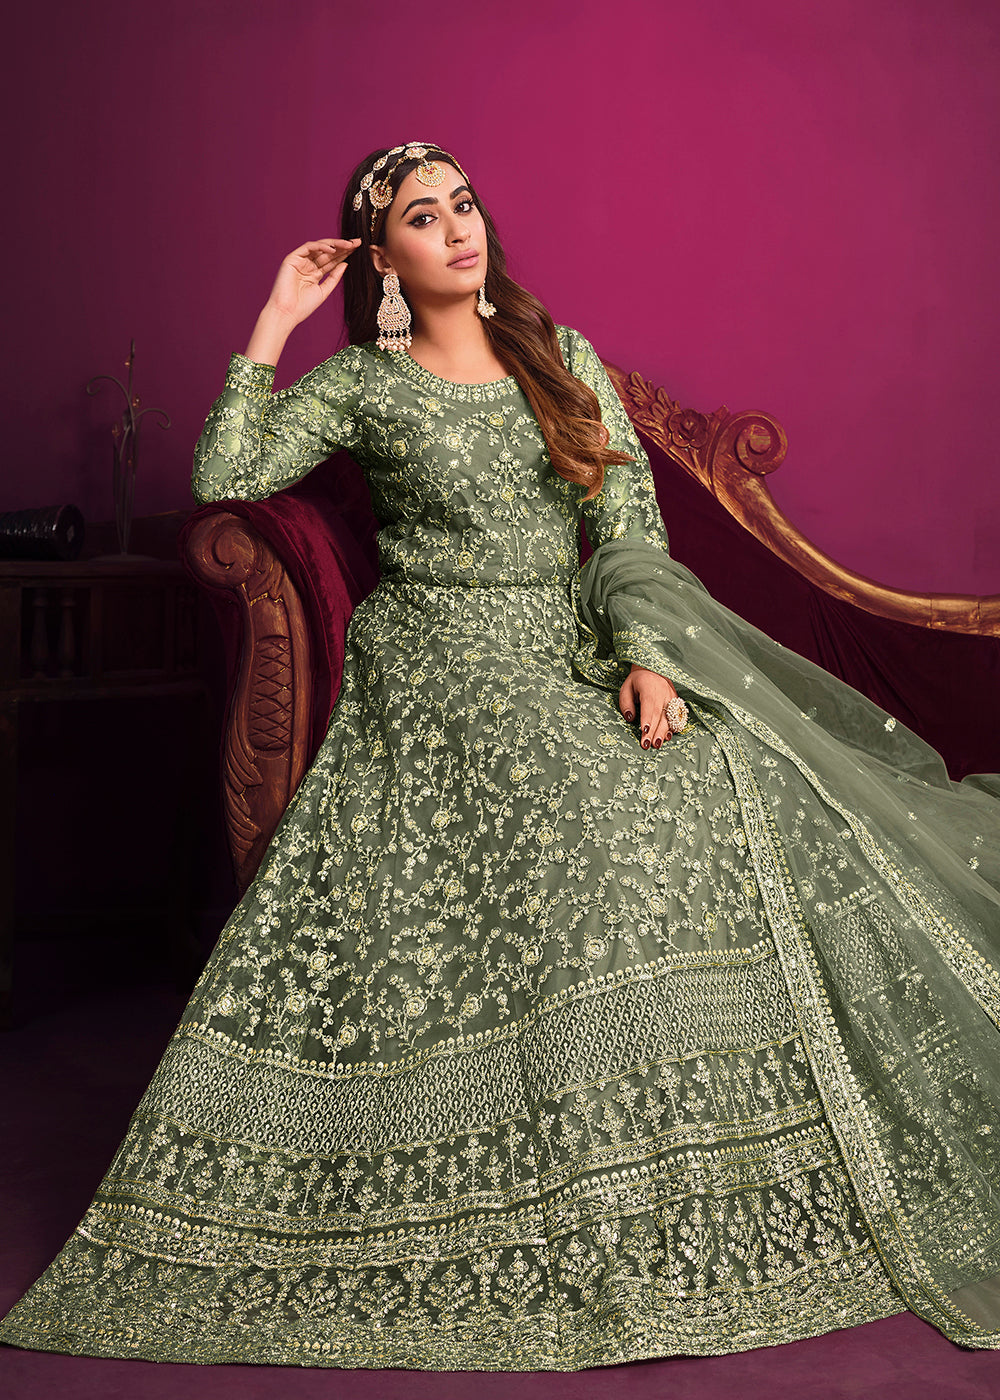 Buy Now Net Engaging Green Floor Length Ceremonial Anarkali Suit Online in USA, UK, Australia, New Zealand, Canada, Italy & Worldwide at Empress Clothing. 